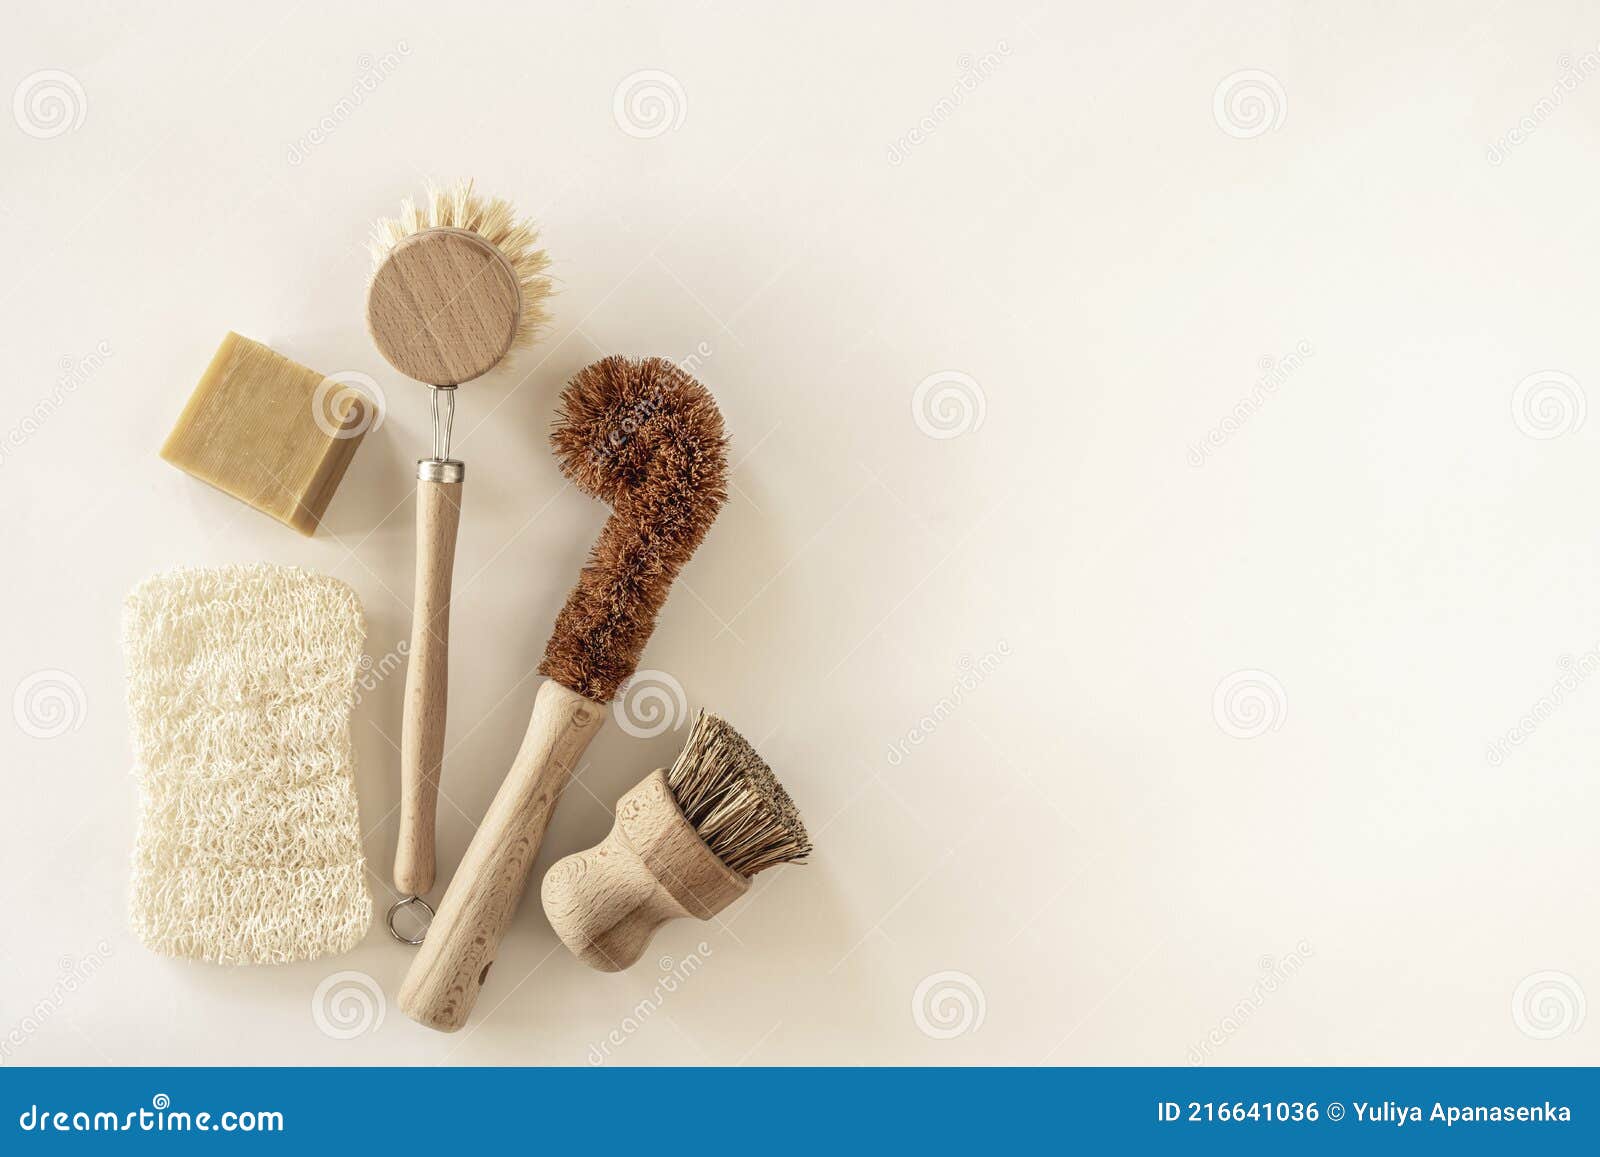 https://thumbs.dreamstime.com/z/zero-waste-kitchen-cleaning-concept-eco-friendly-natural-tools-products-bamboo-dish-brushes-no-plastic-lifestyle-top-view-flat-216641036.jpg